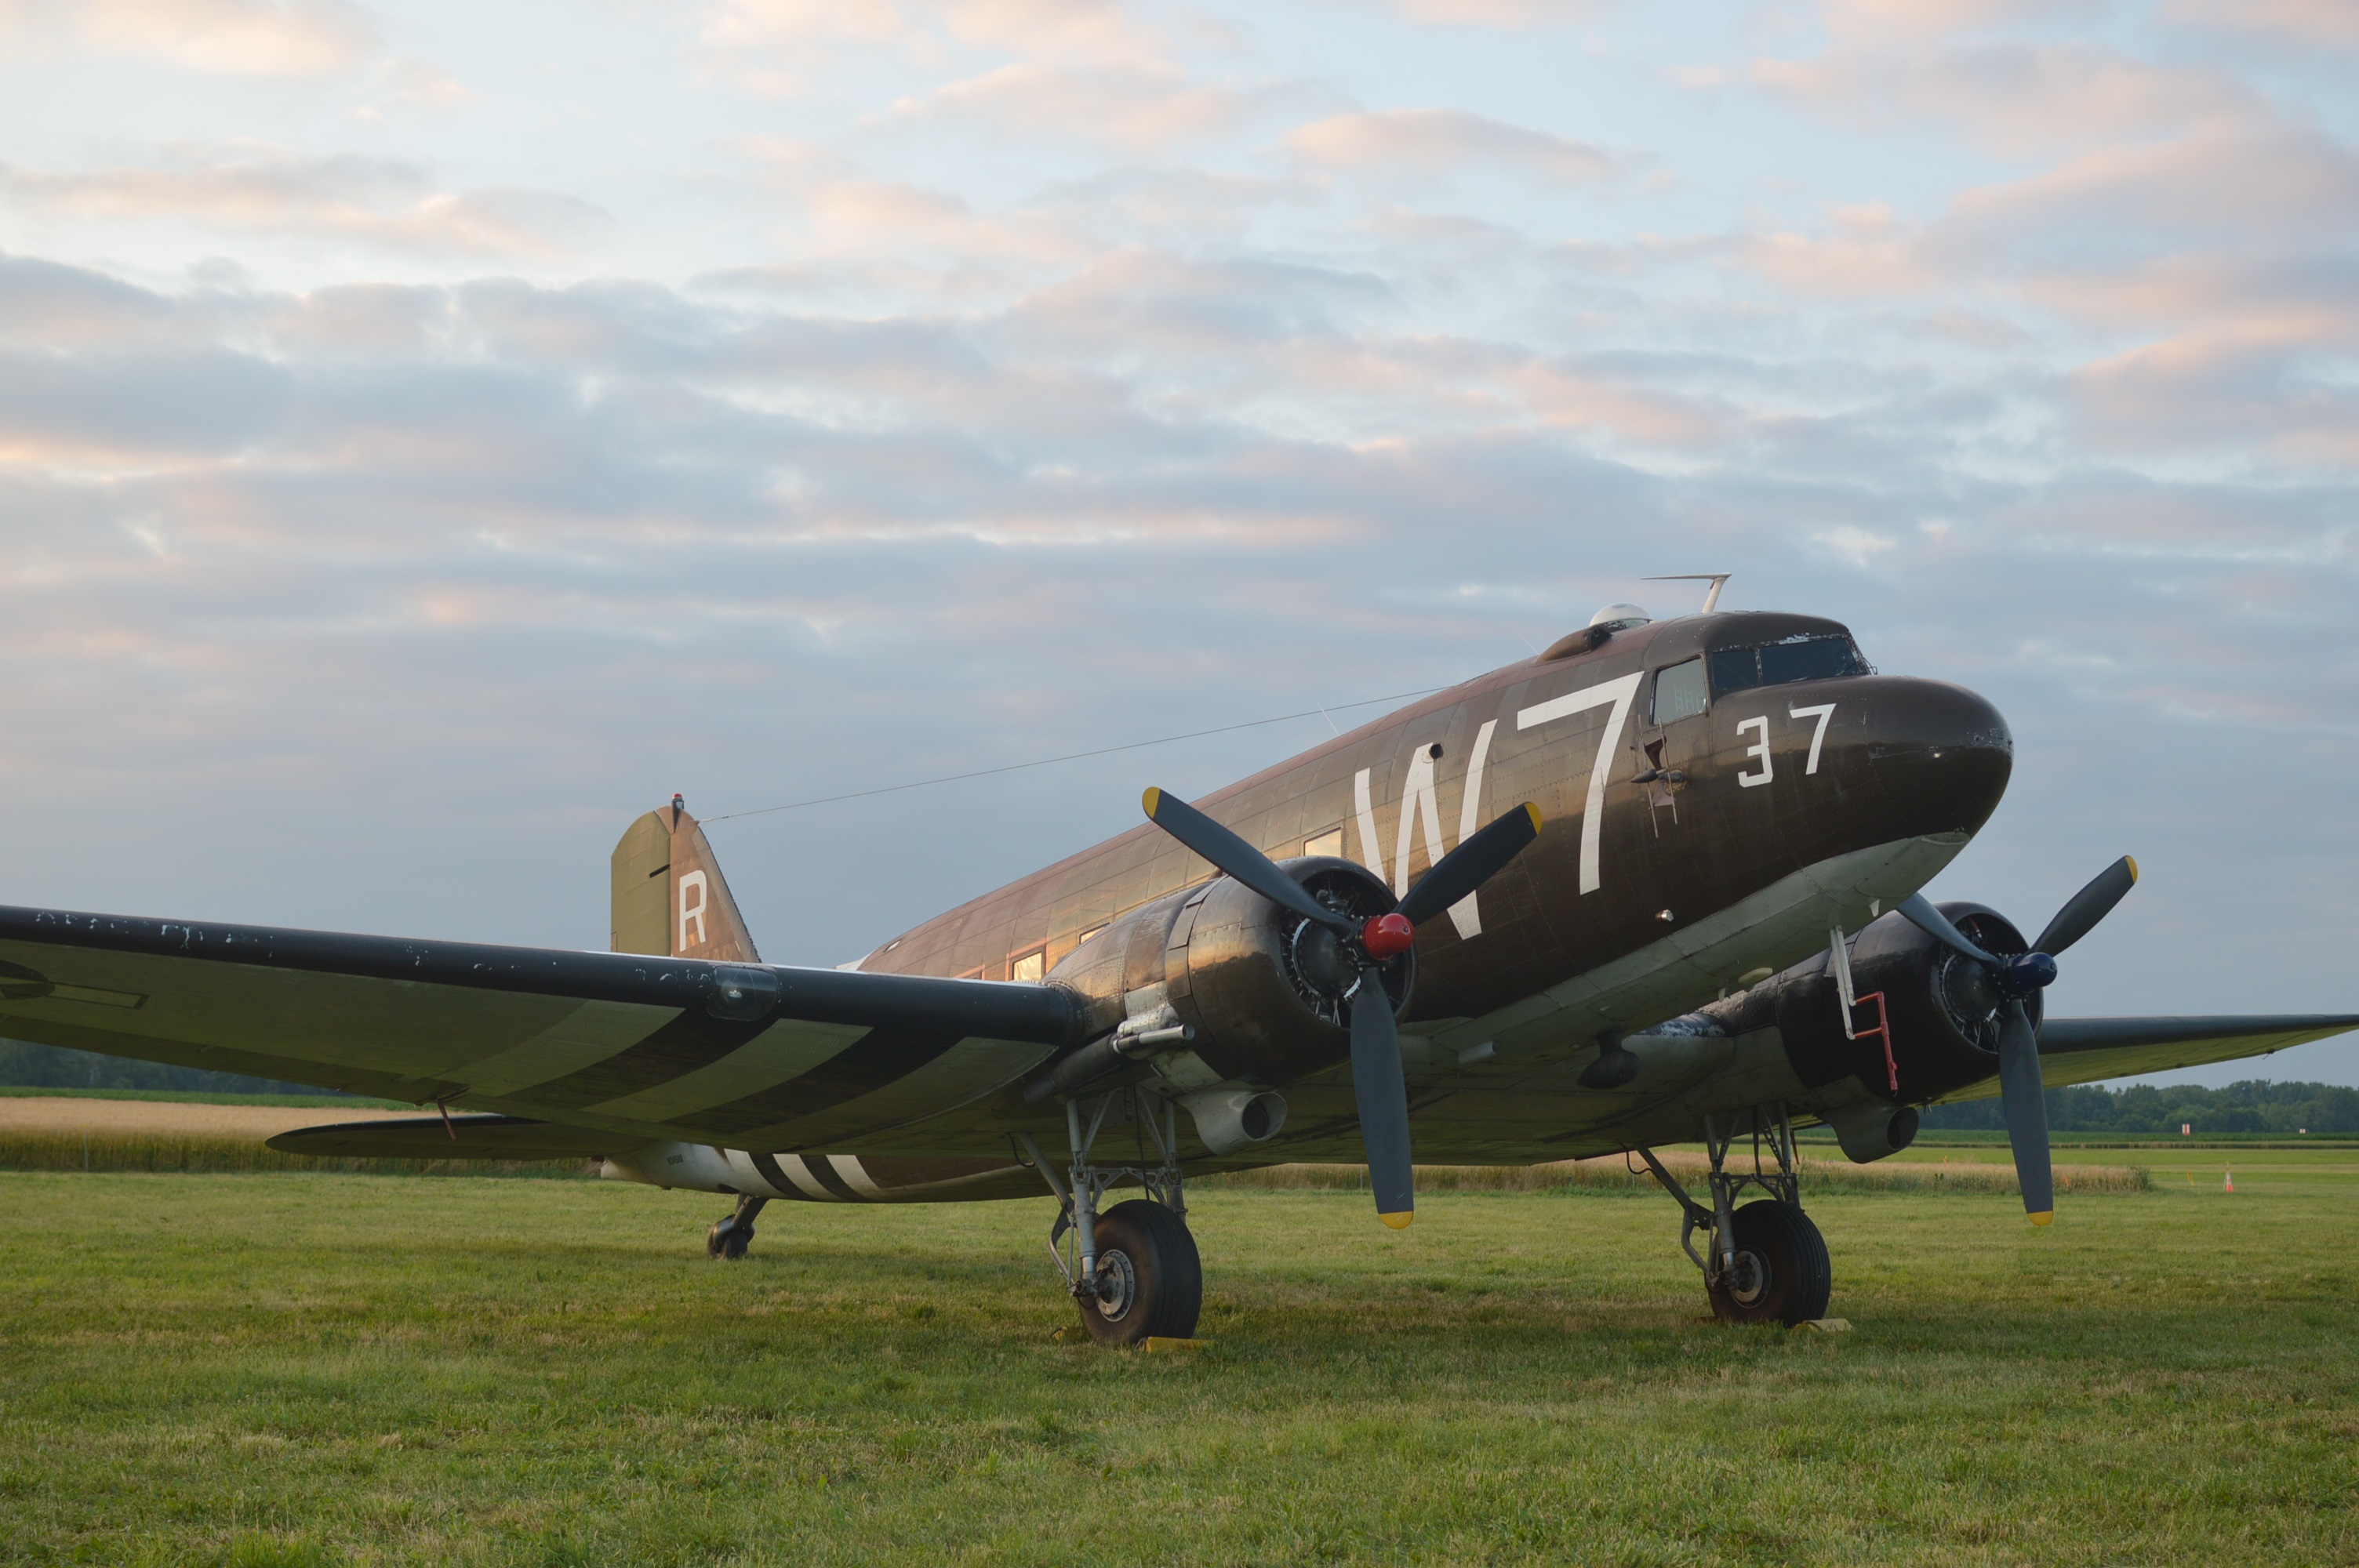 C-47 Whiskey 7 at the 2019 National Warplane Museum Airshow in Geneseo, New York. (Credit Anthony C. Hayes)